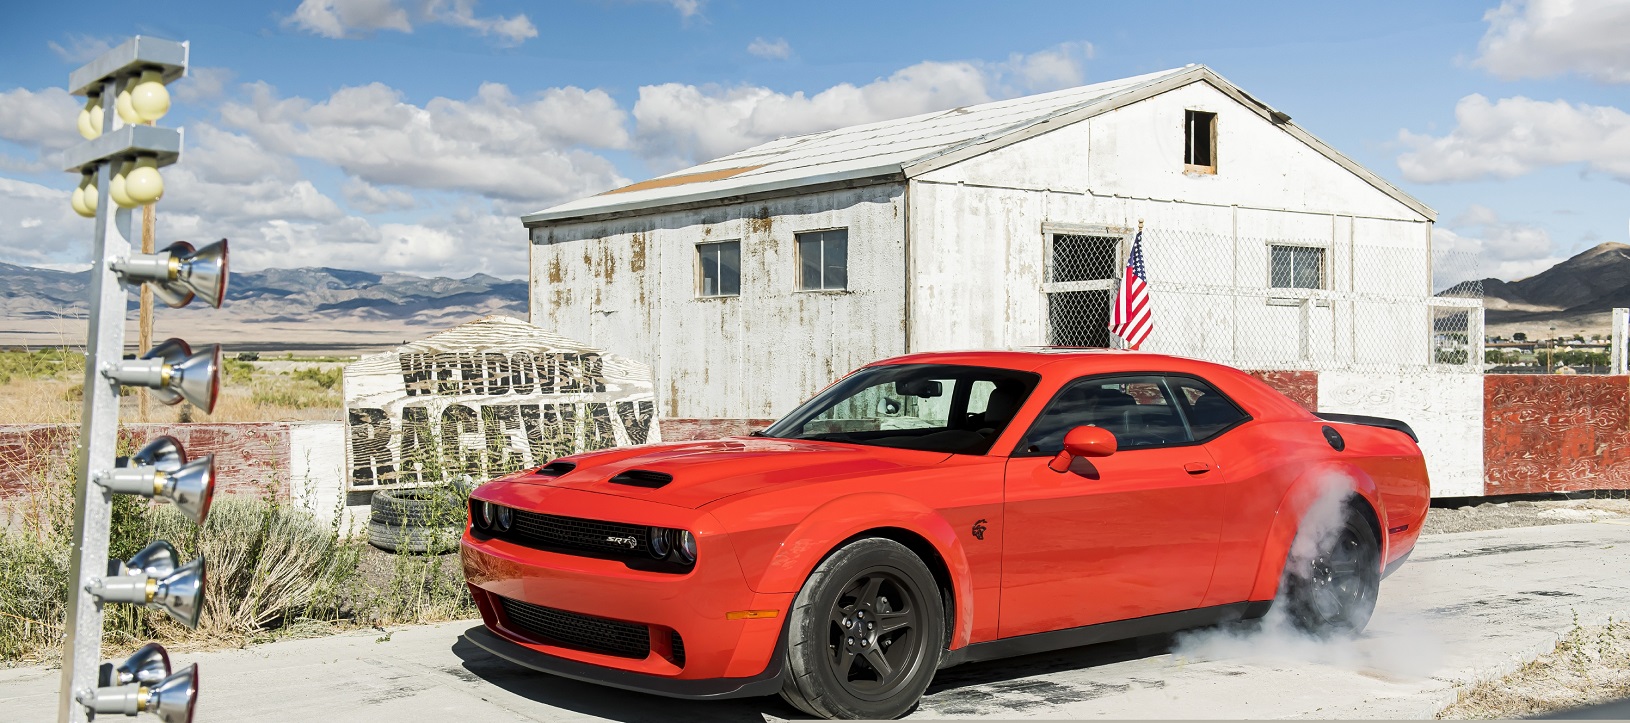 2020 Challenger SRT<sup>®</sup> Super Stock Is the Newest Dodge Drag-racing Machine